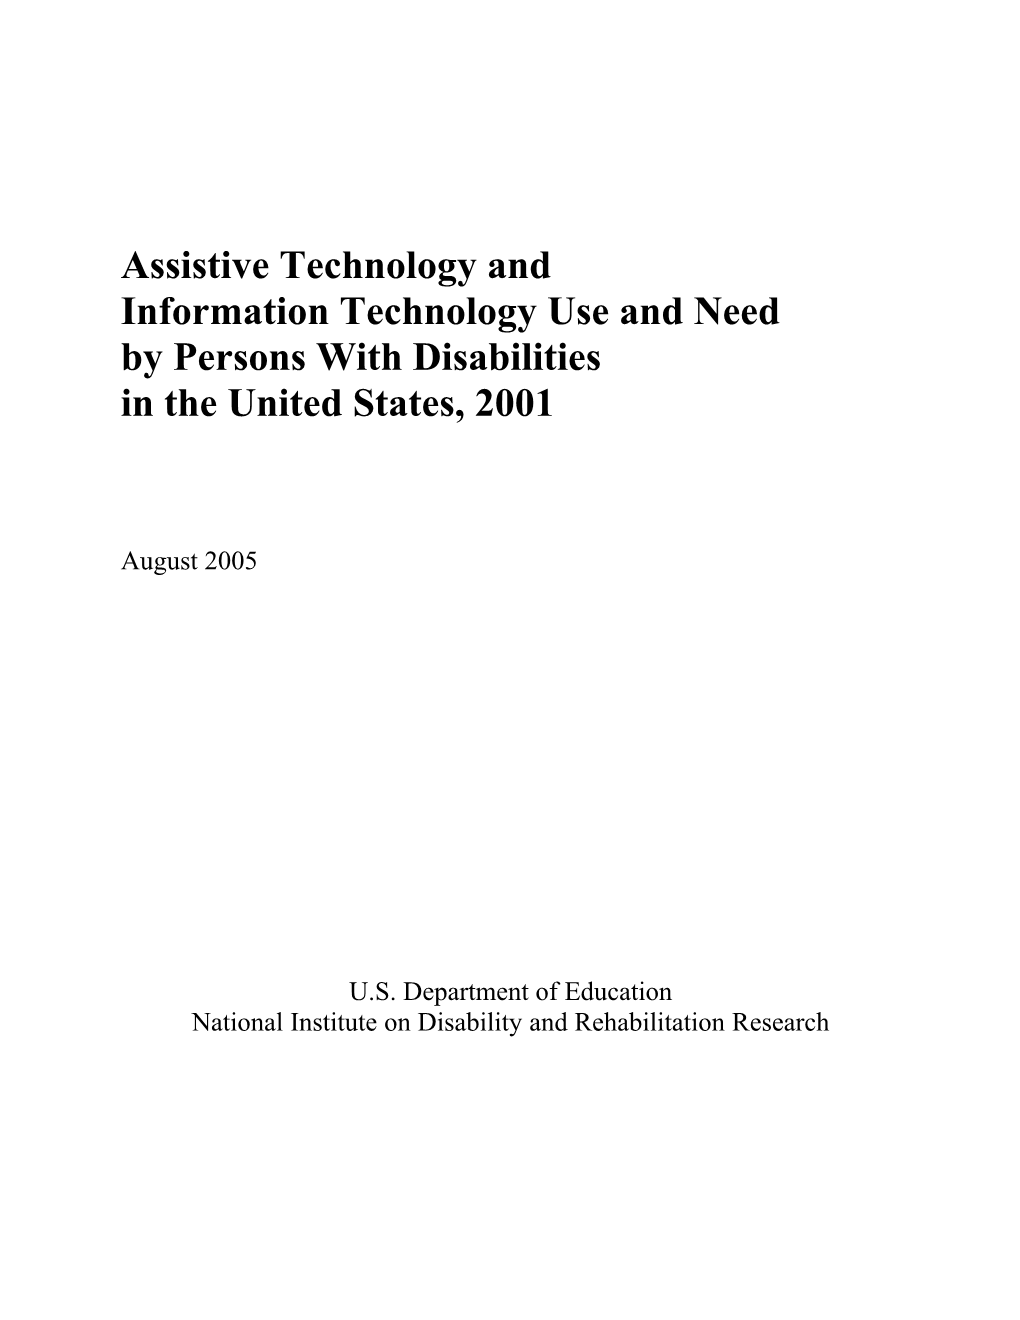 Assistive Technology and Information Technology Use and Need in the United States, 2001